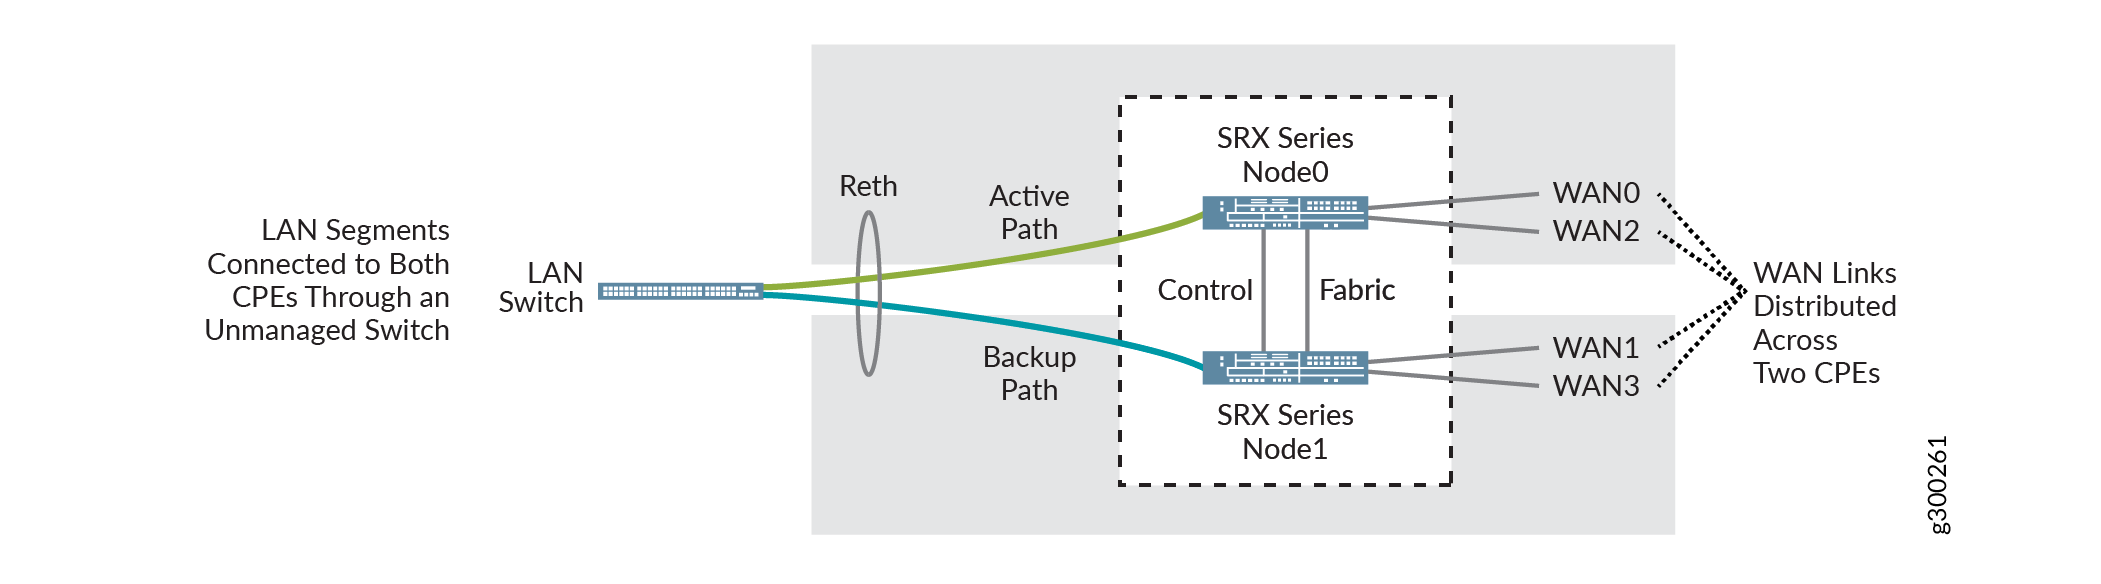 Dual CPE Devices
- SRX Series Devices